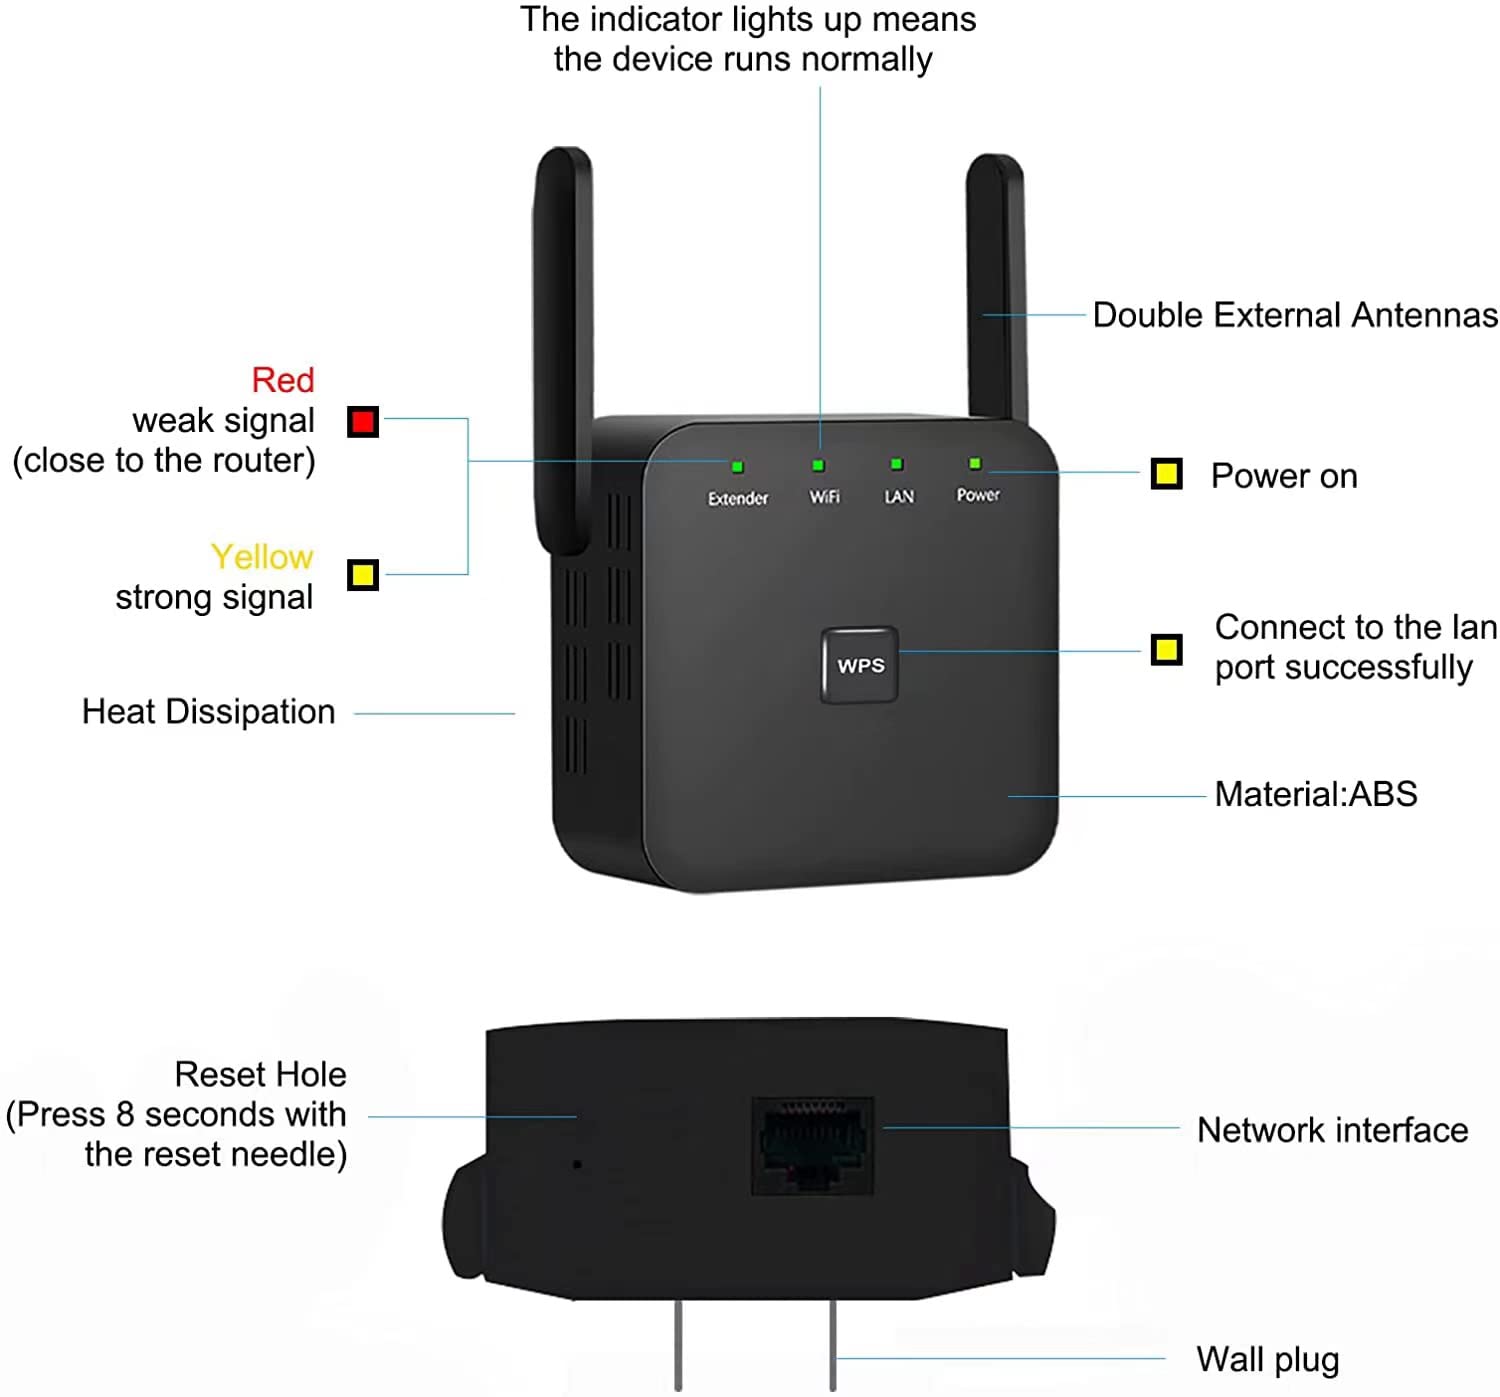 HIMALU 2024 Newest WiFi Extender/Repeater，Covers Up to 9860 Sq.ft and 60 Devices, Internet Booster - with Ethernet Port, Quick Setup, Home Wireless Signal Booster